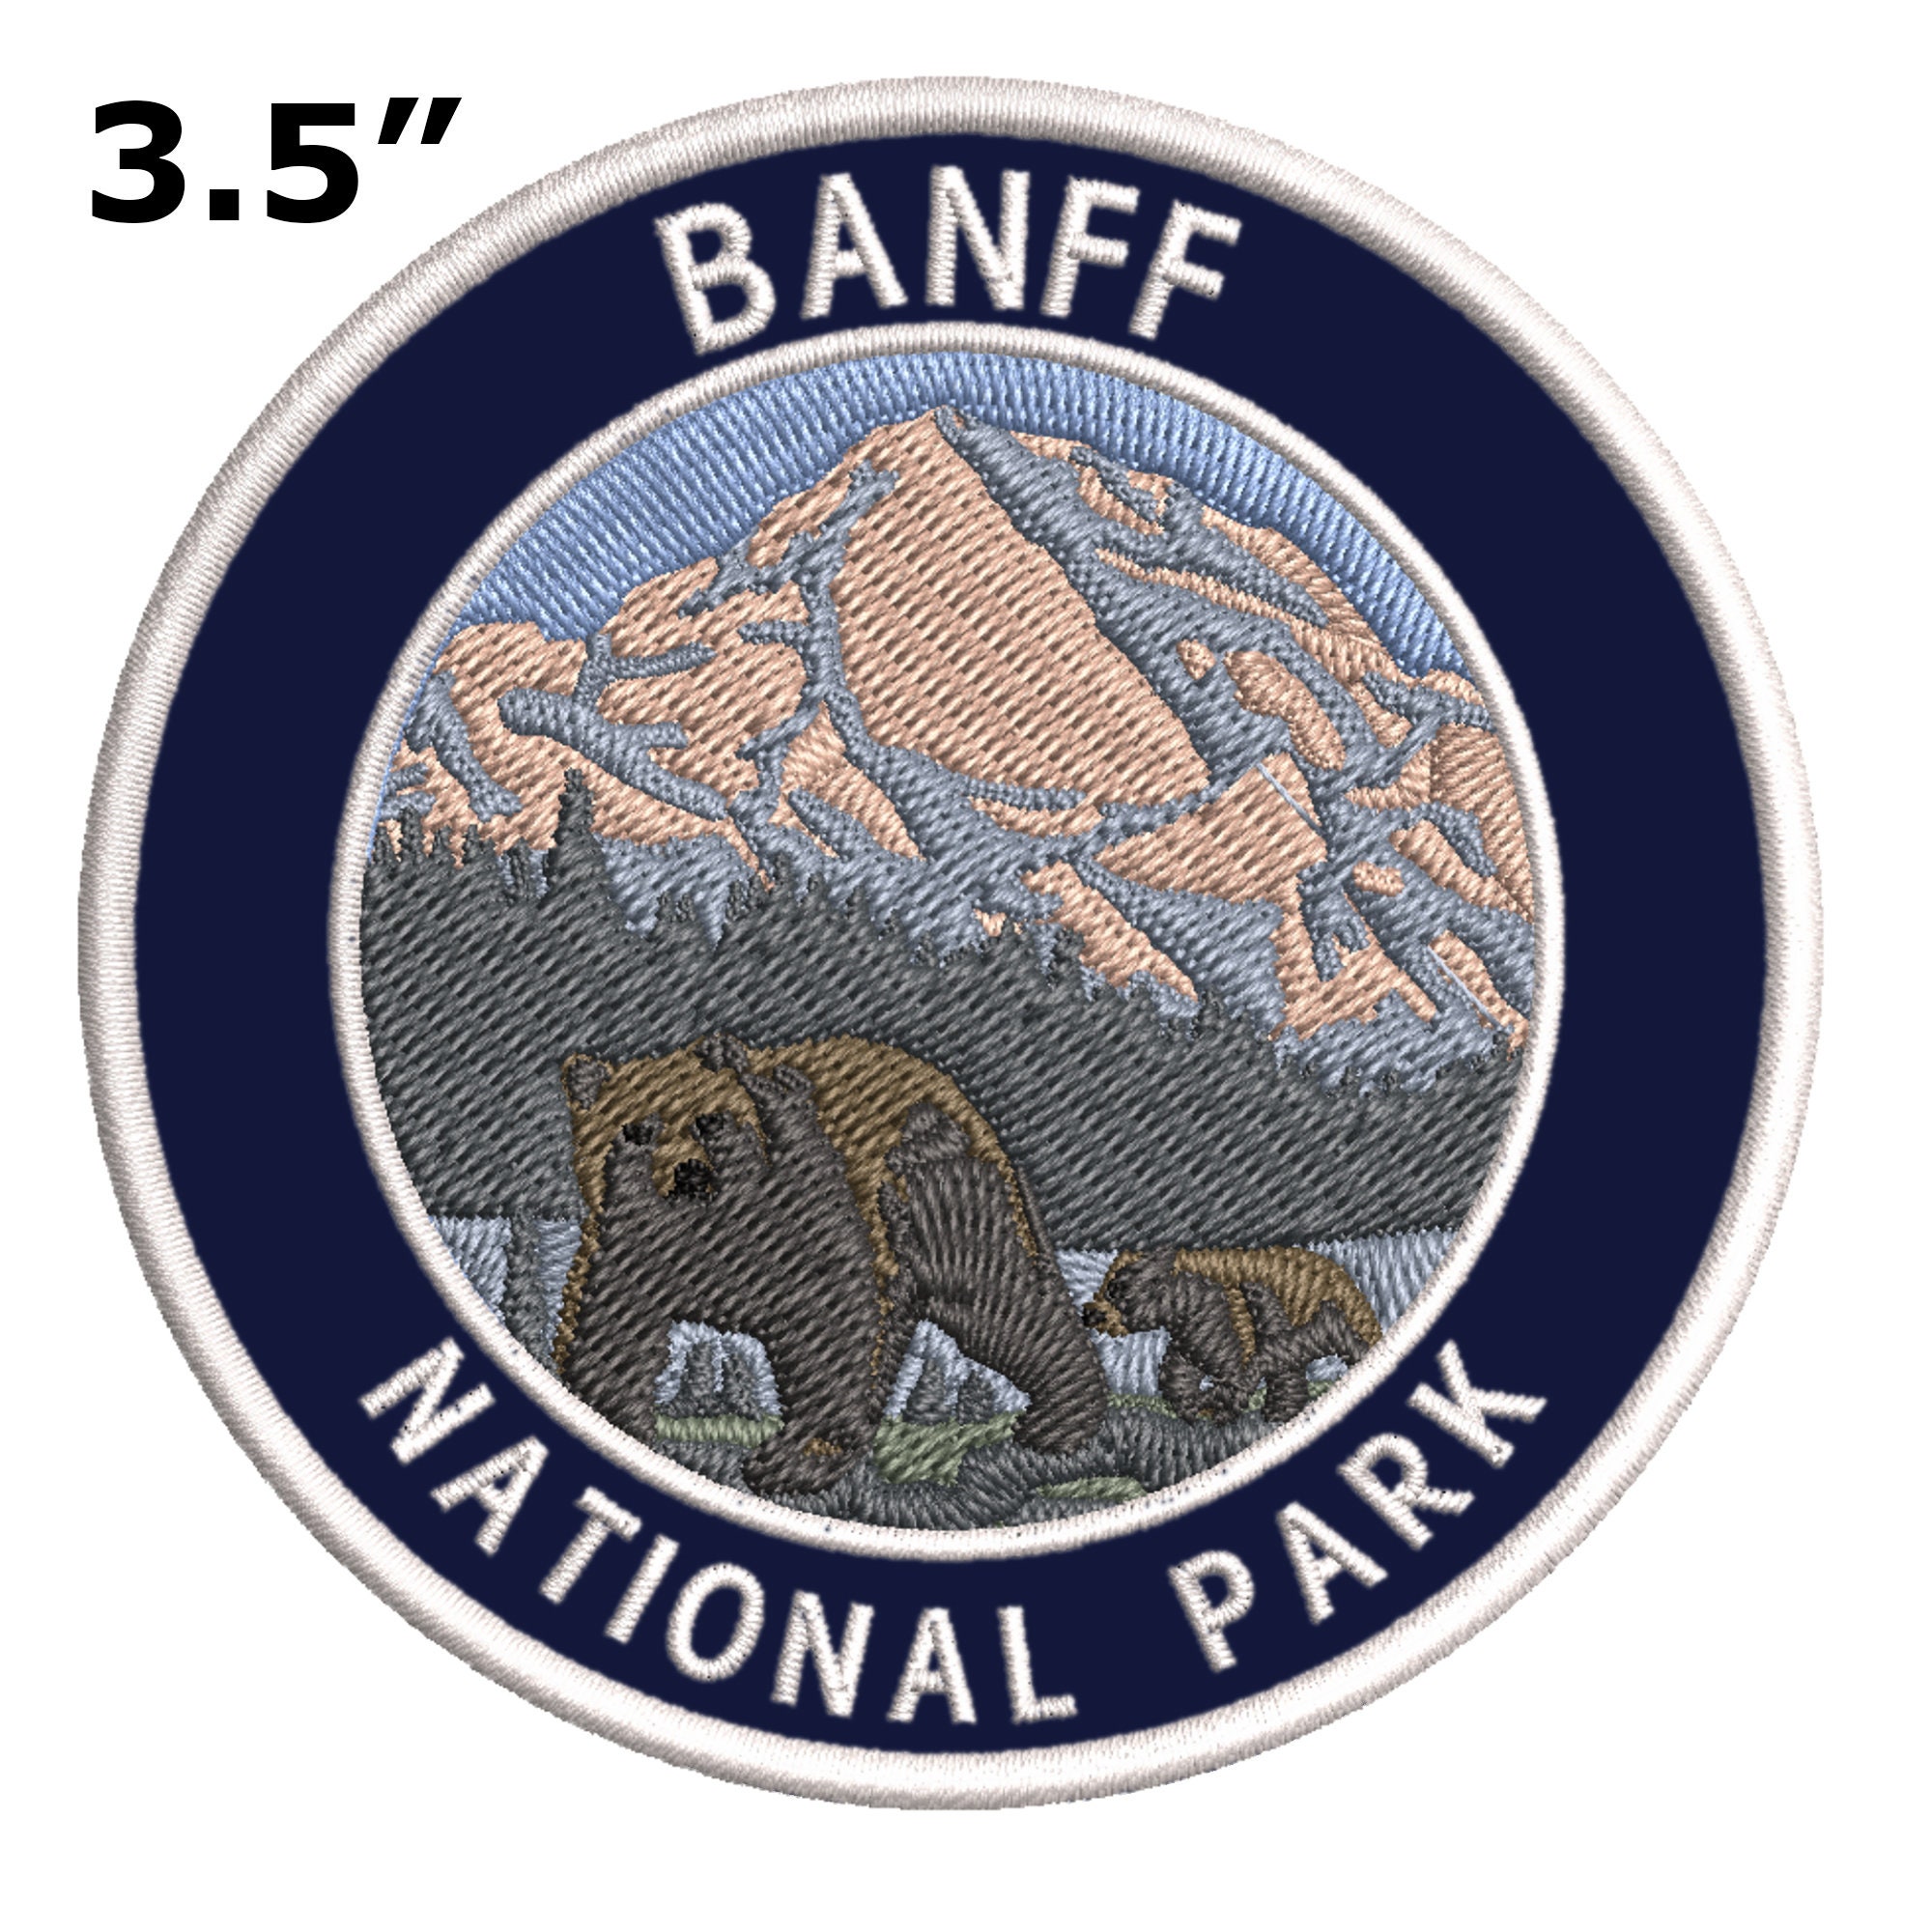 Banff National Park Full embroidered illustrated iron-on patch